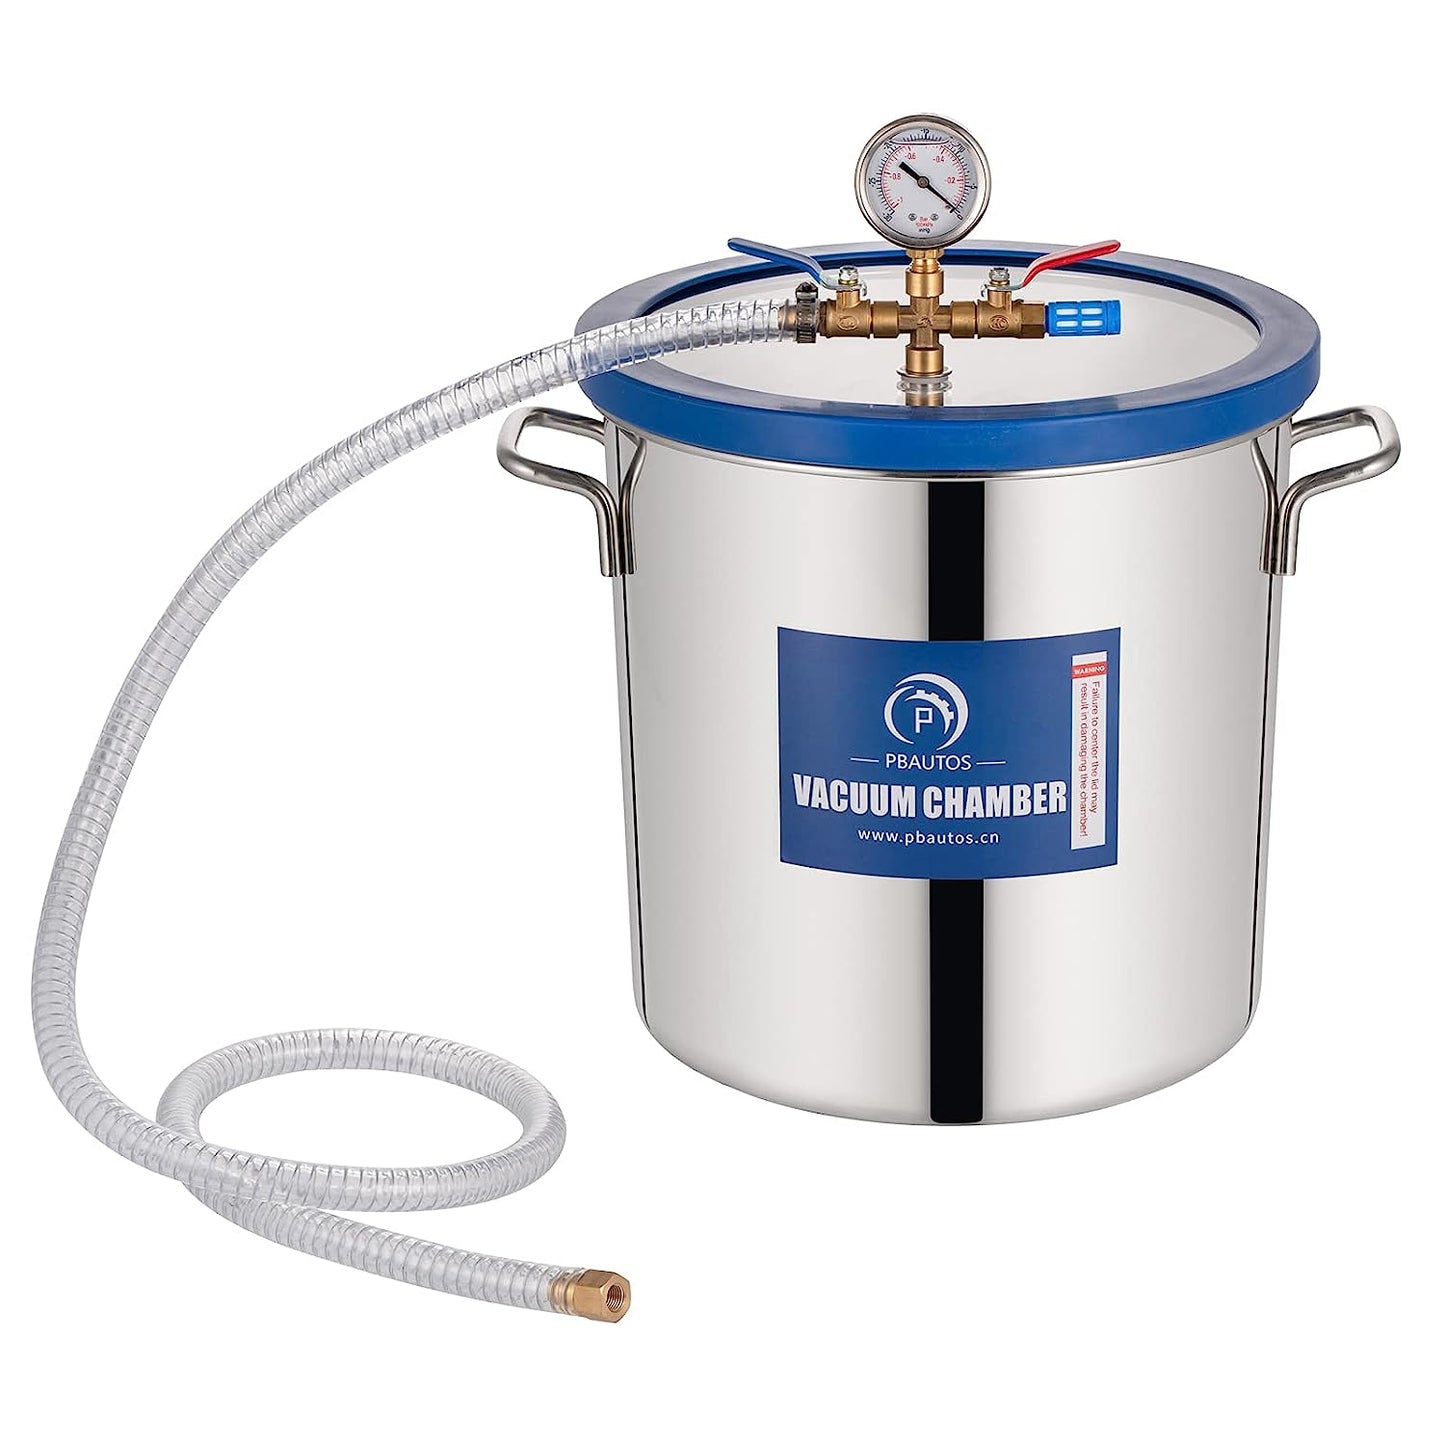 5 Gallon Vacuum Chamber, Stainless Steel Vacuum Degassing Chamber 18.92L, Degassing Chamber with Acrylic Crystal Lid for Resin Casting, Degassing Essential Oils, Not for Stabilizing Wood